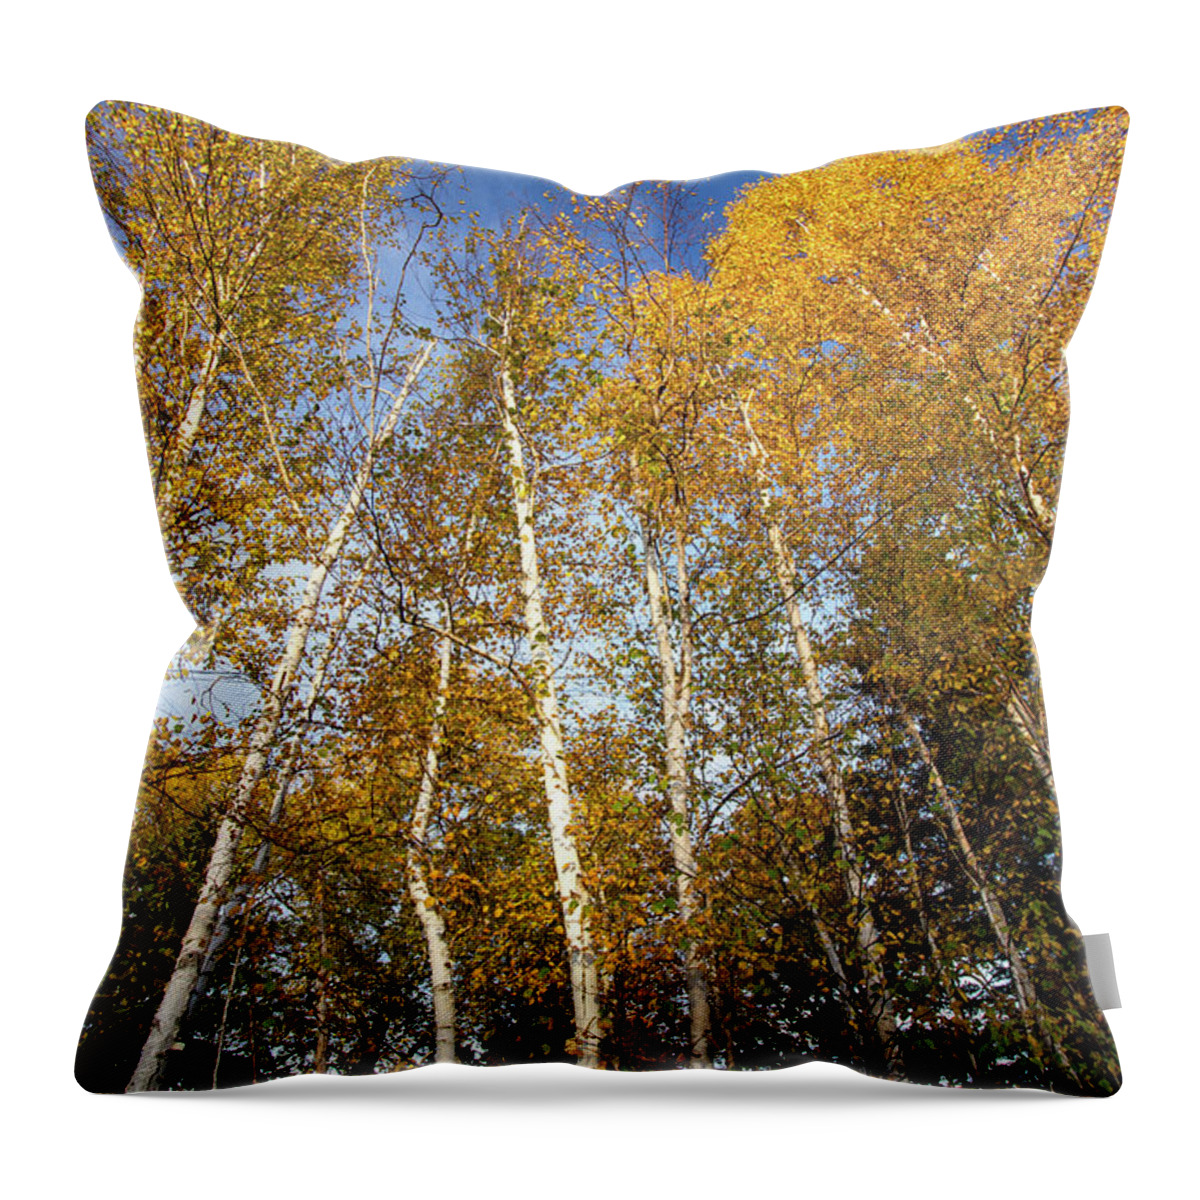 Rangeley Throw Pillow featuring the photograph Looking up by Darryl Hendricks